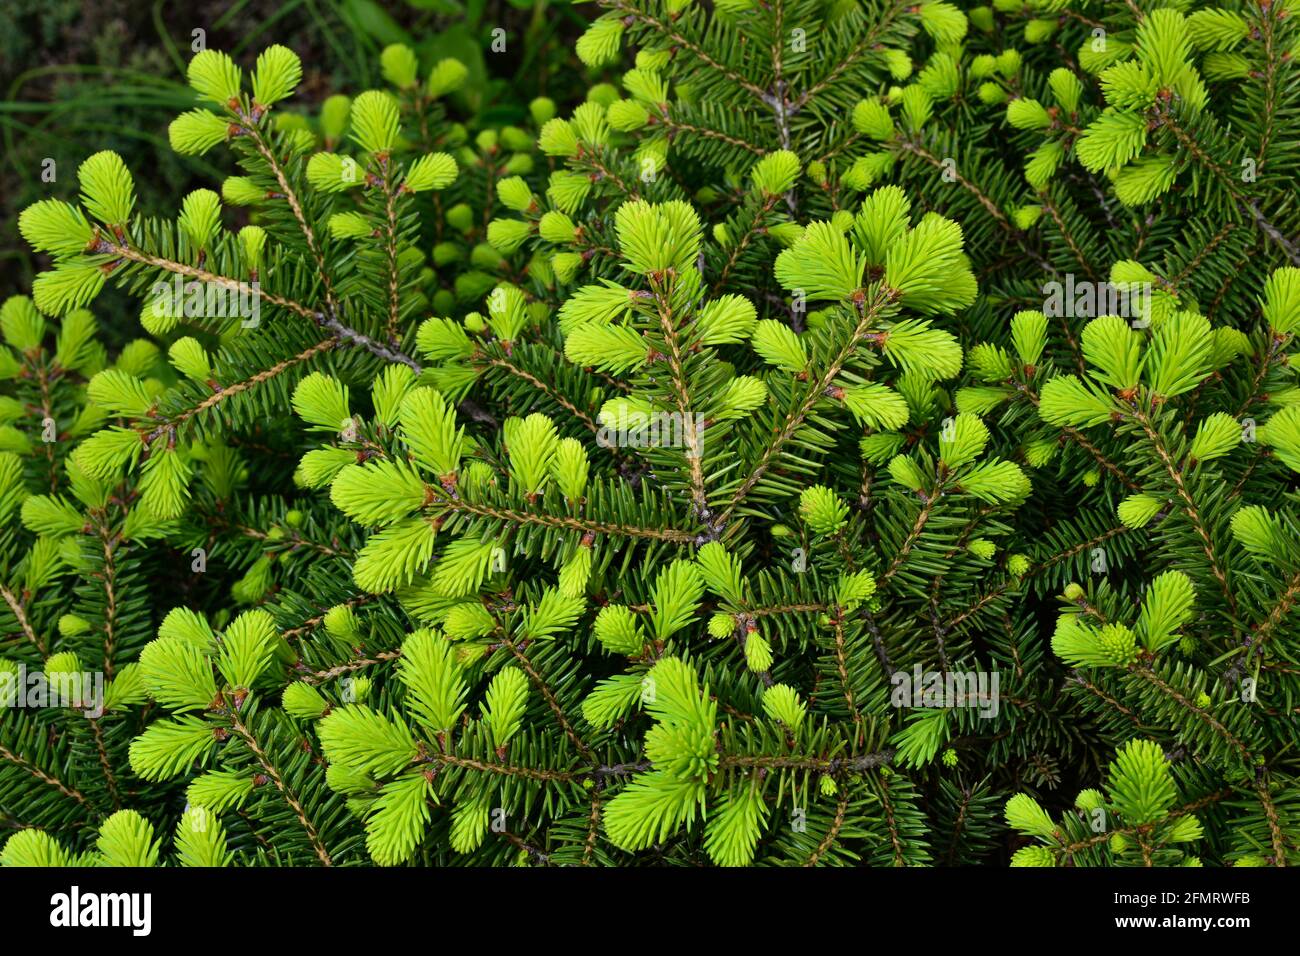 Norway spruce - Picea abies or European spruce with young shoots Stock Photo